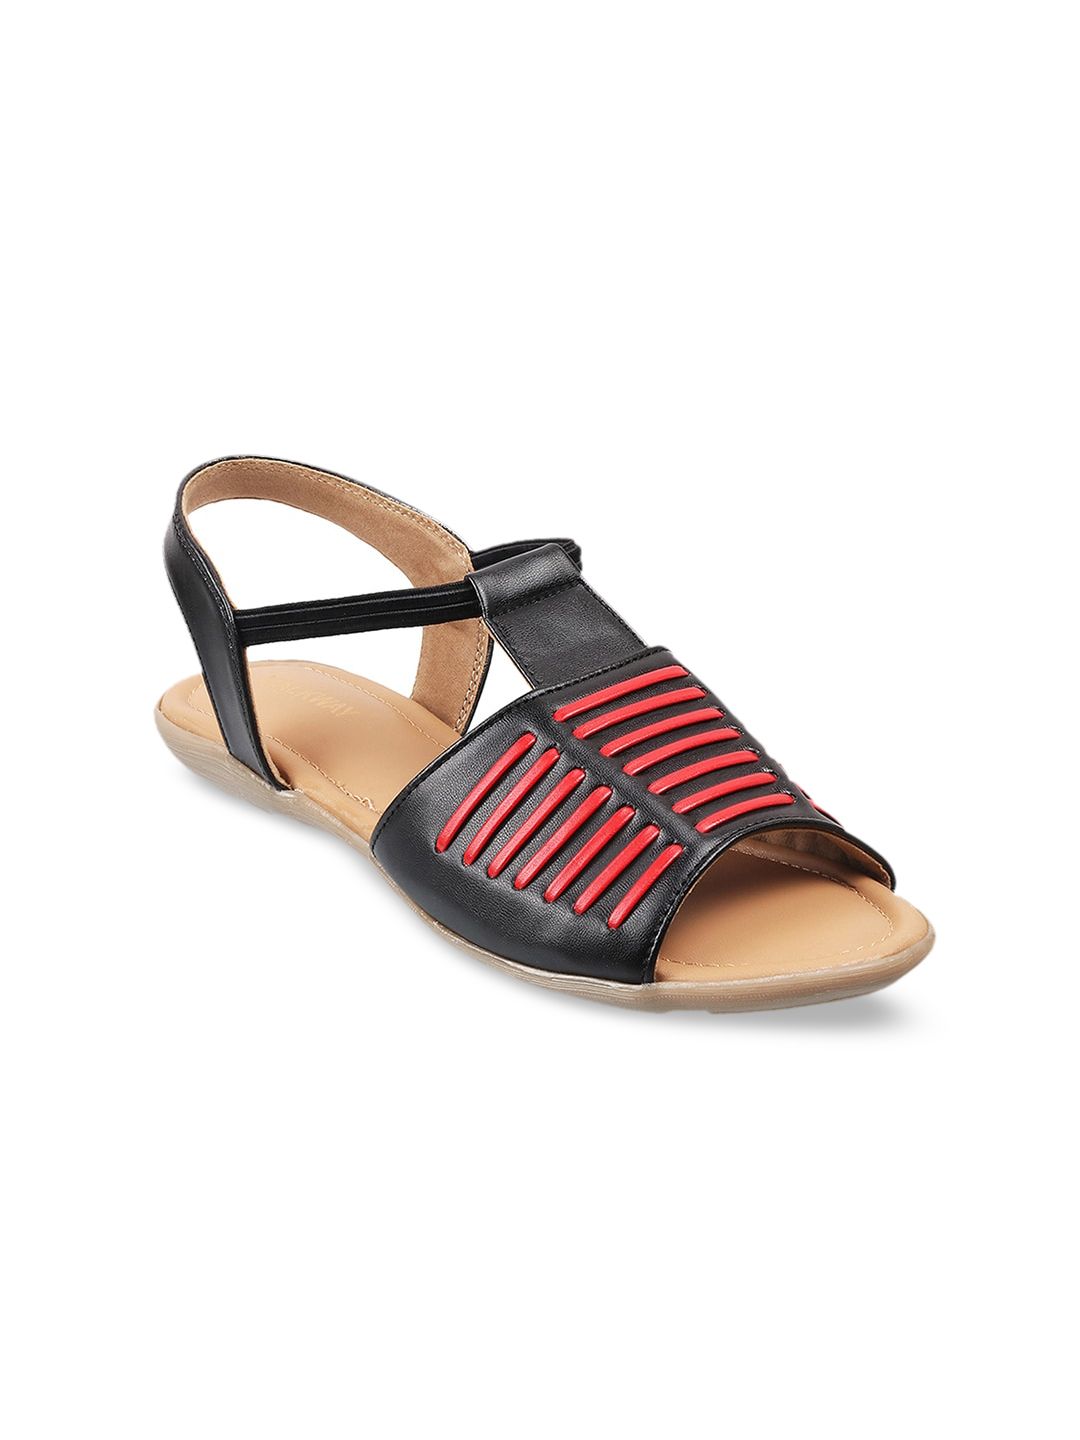 WALKWAY by Metro Women Black & Red Striped Open Toe Flats Price in India